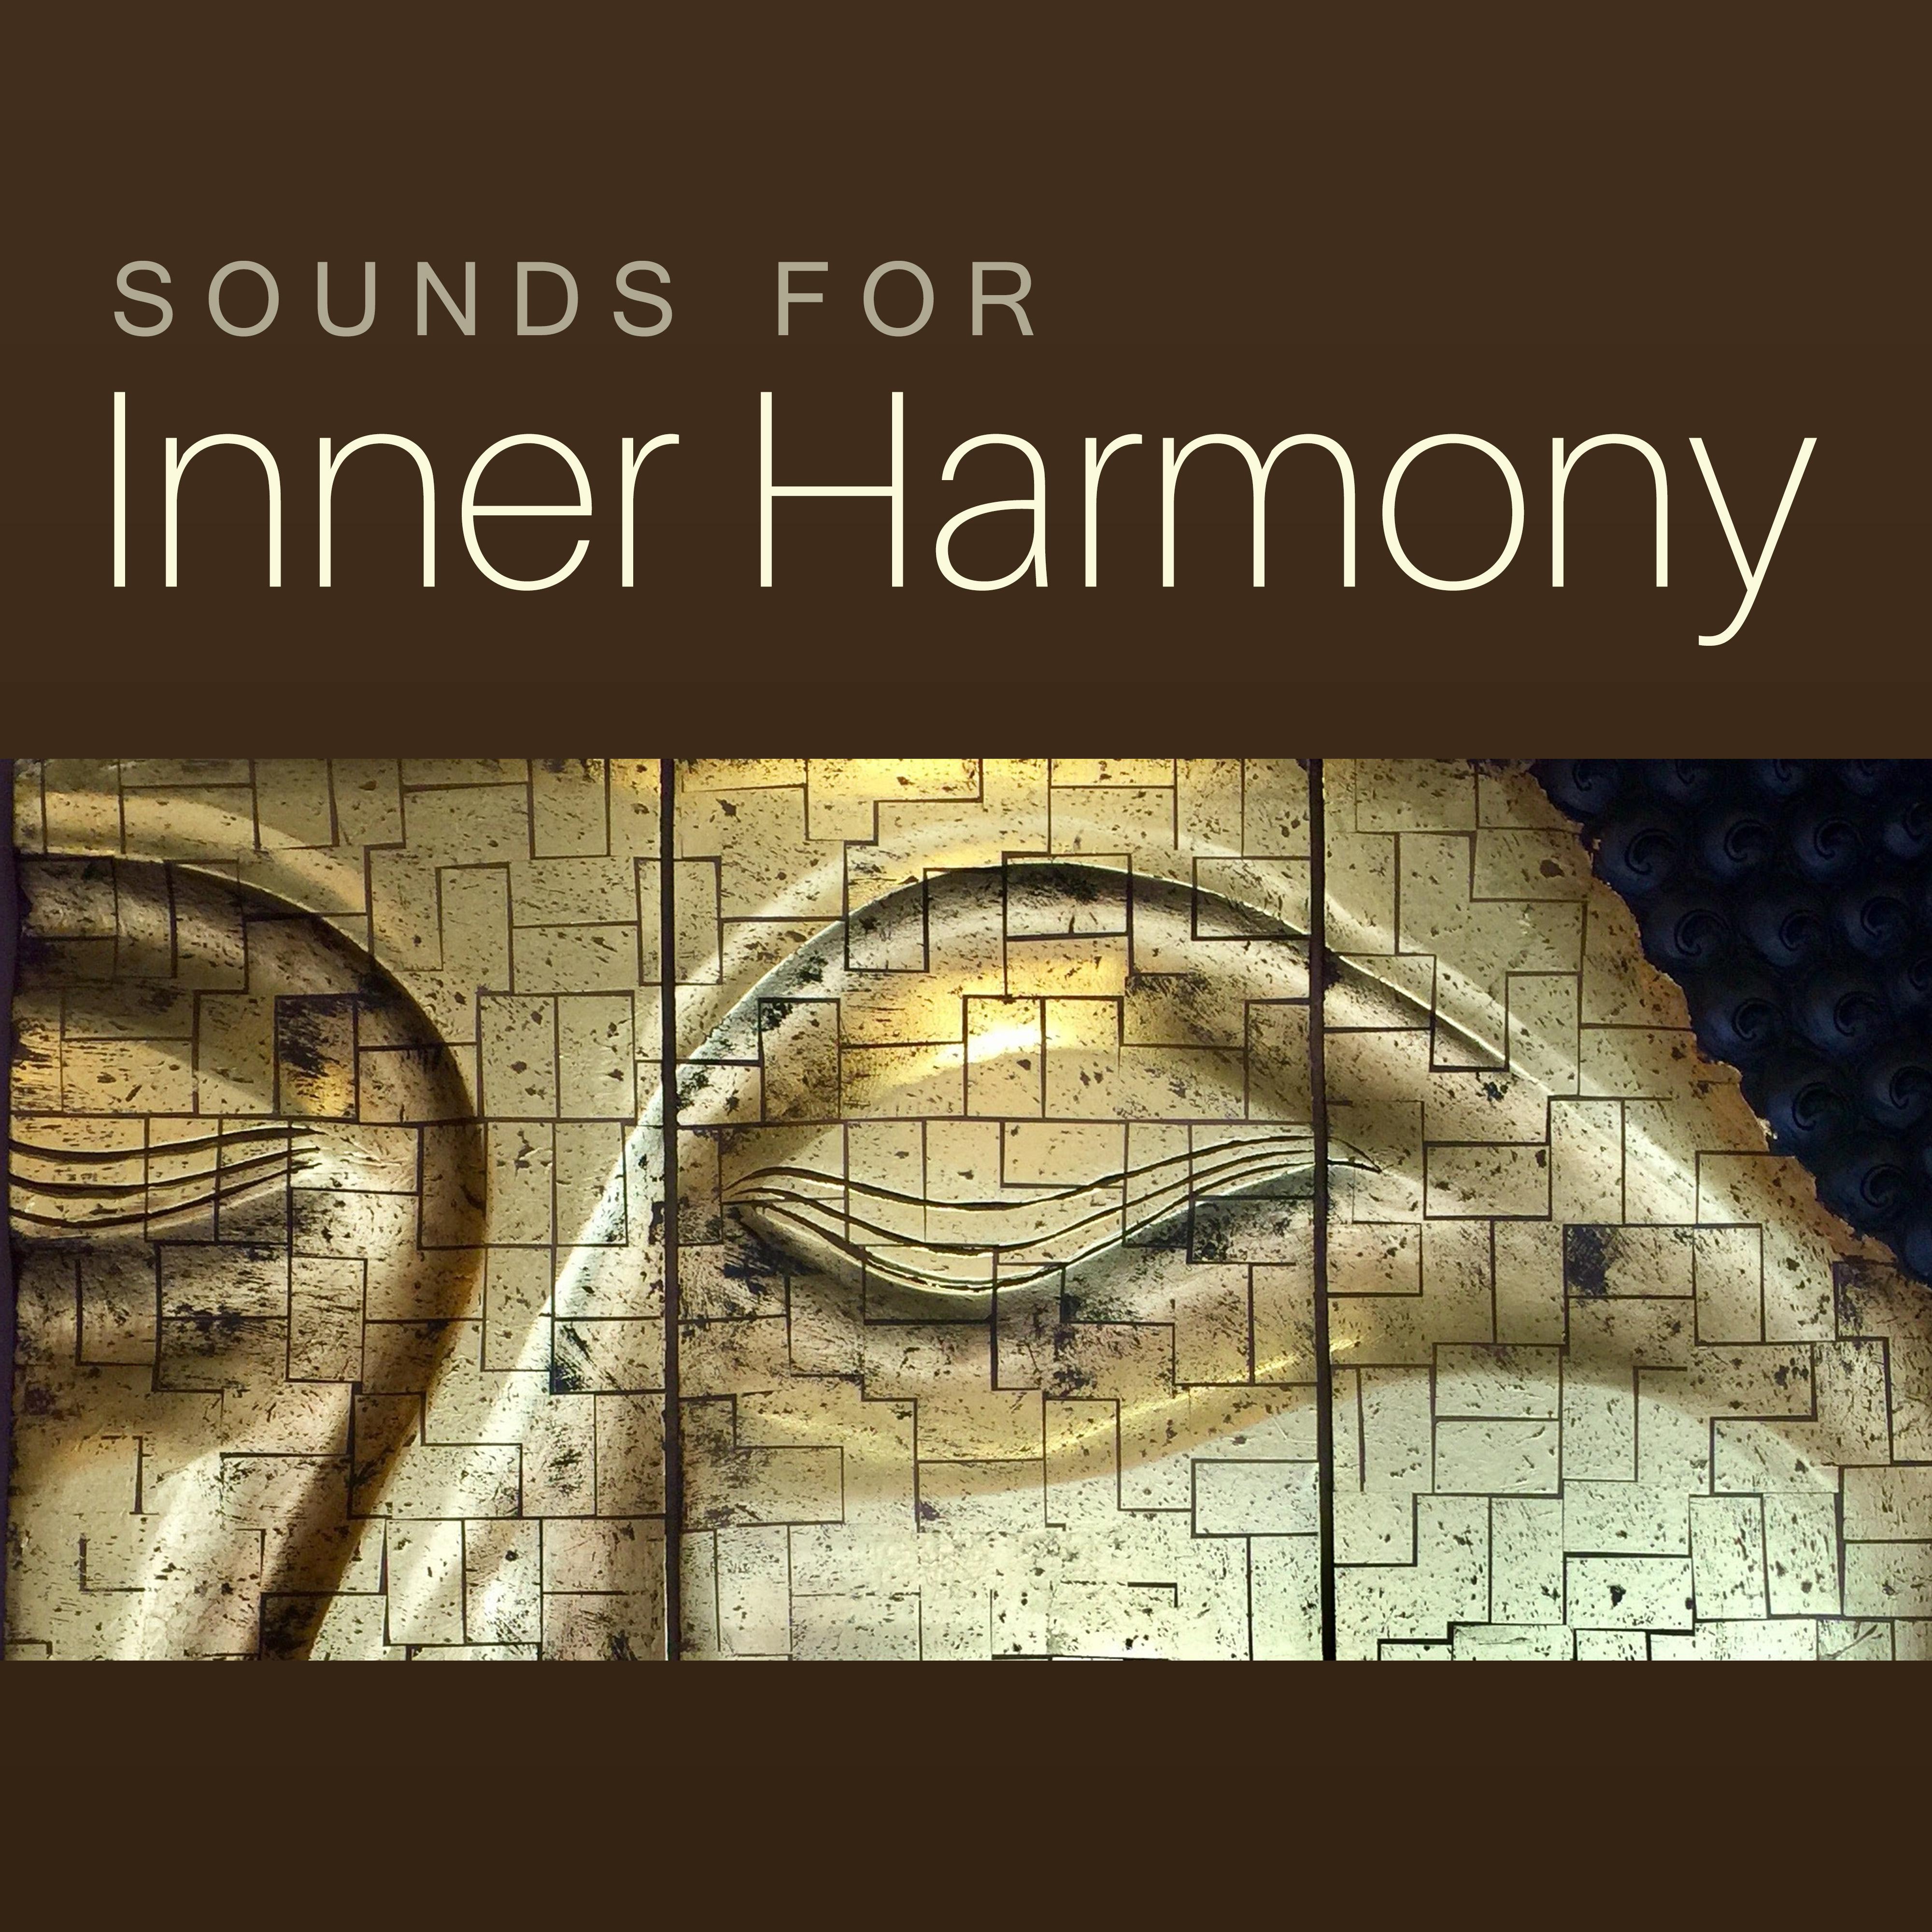 Sounds for Inner Harmony  Relaxing New Age Sounds, Peaceful Waves, Buddha Lounge, Meditation  Relaxation